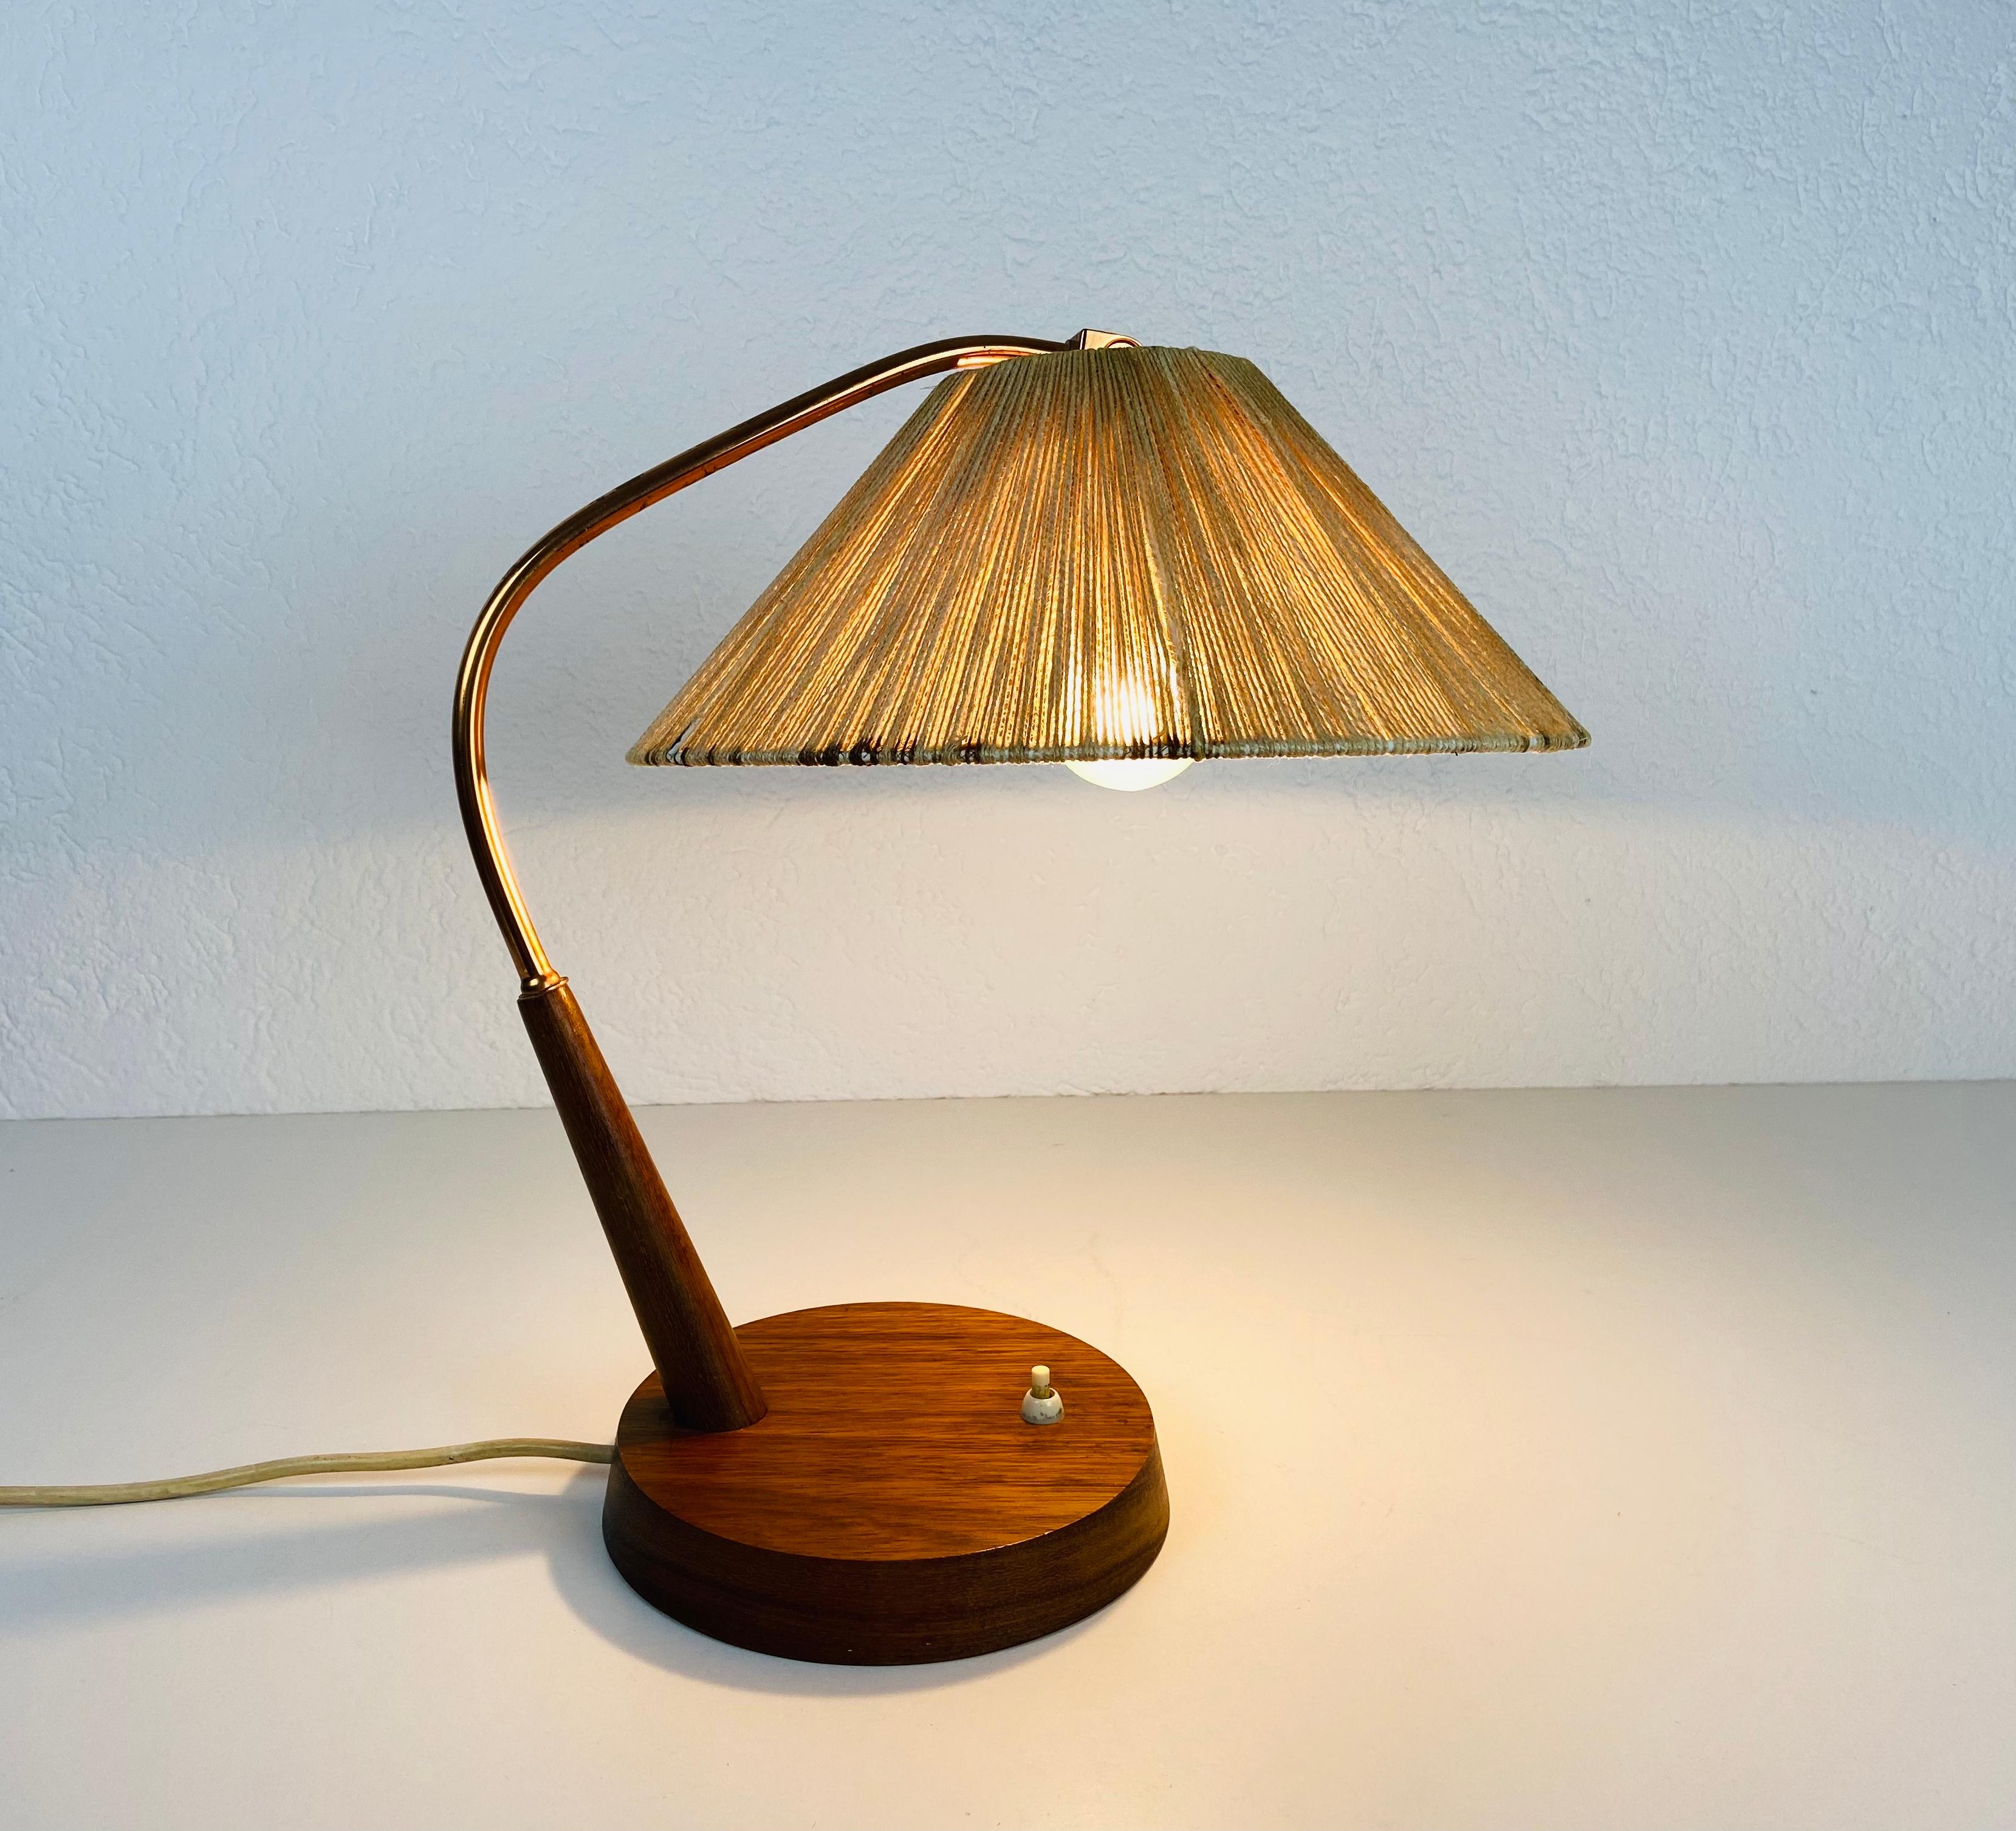 A wonderful teak table lamp made in the 1960s by Temde in Switzerland. It is fascinating with its rare lamp shade.

The light requires one E27 (US E26) light bulb. Good vintage condition.

Free worldwide express shipping.